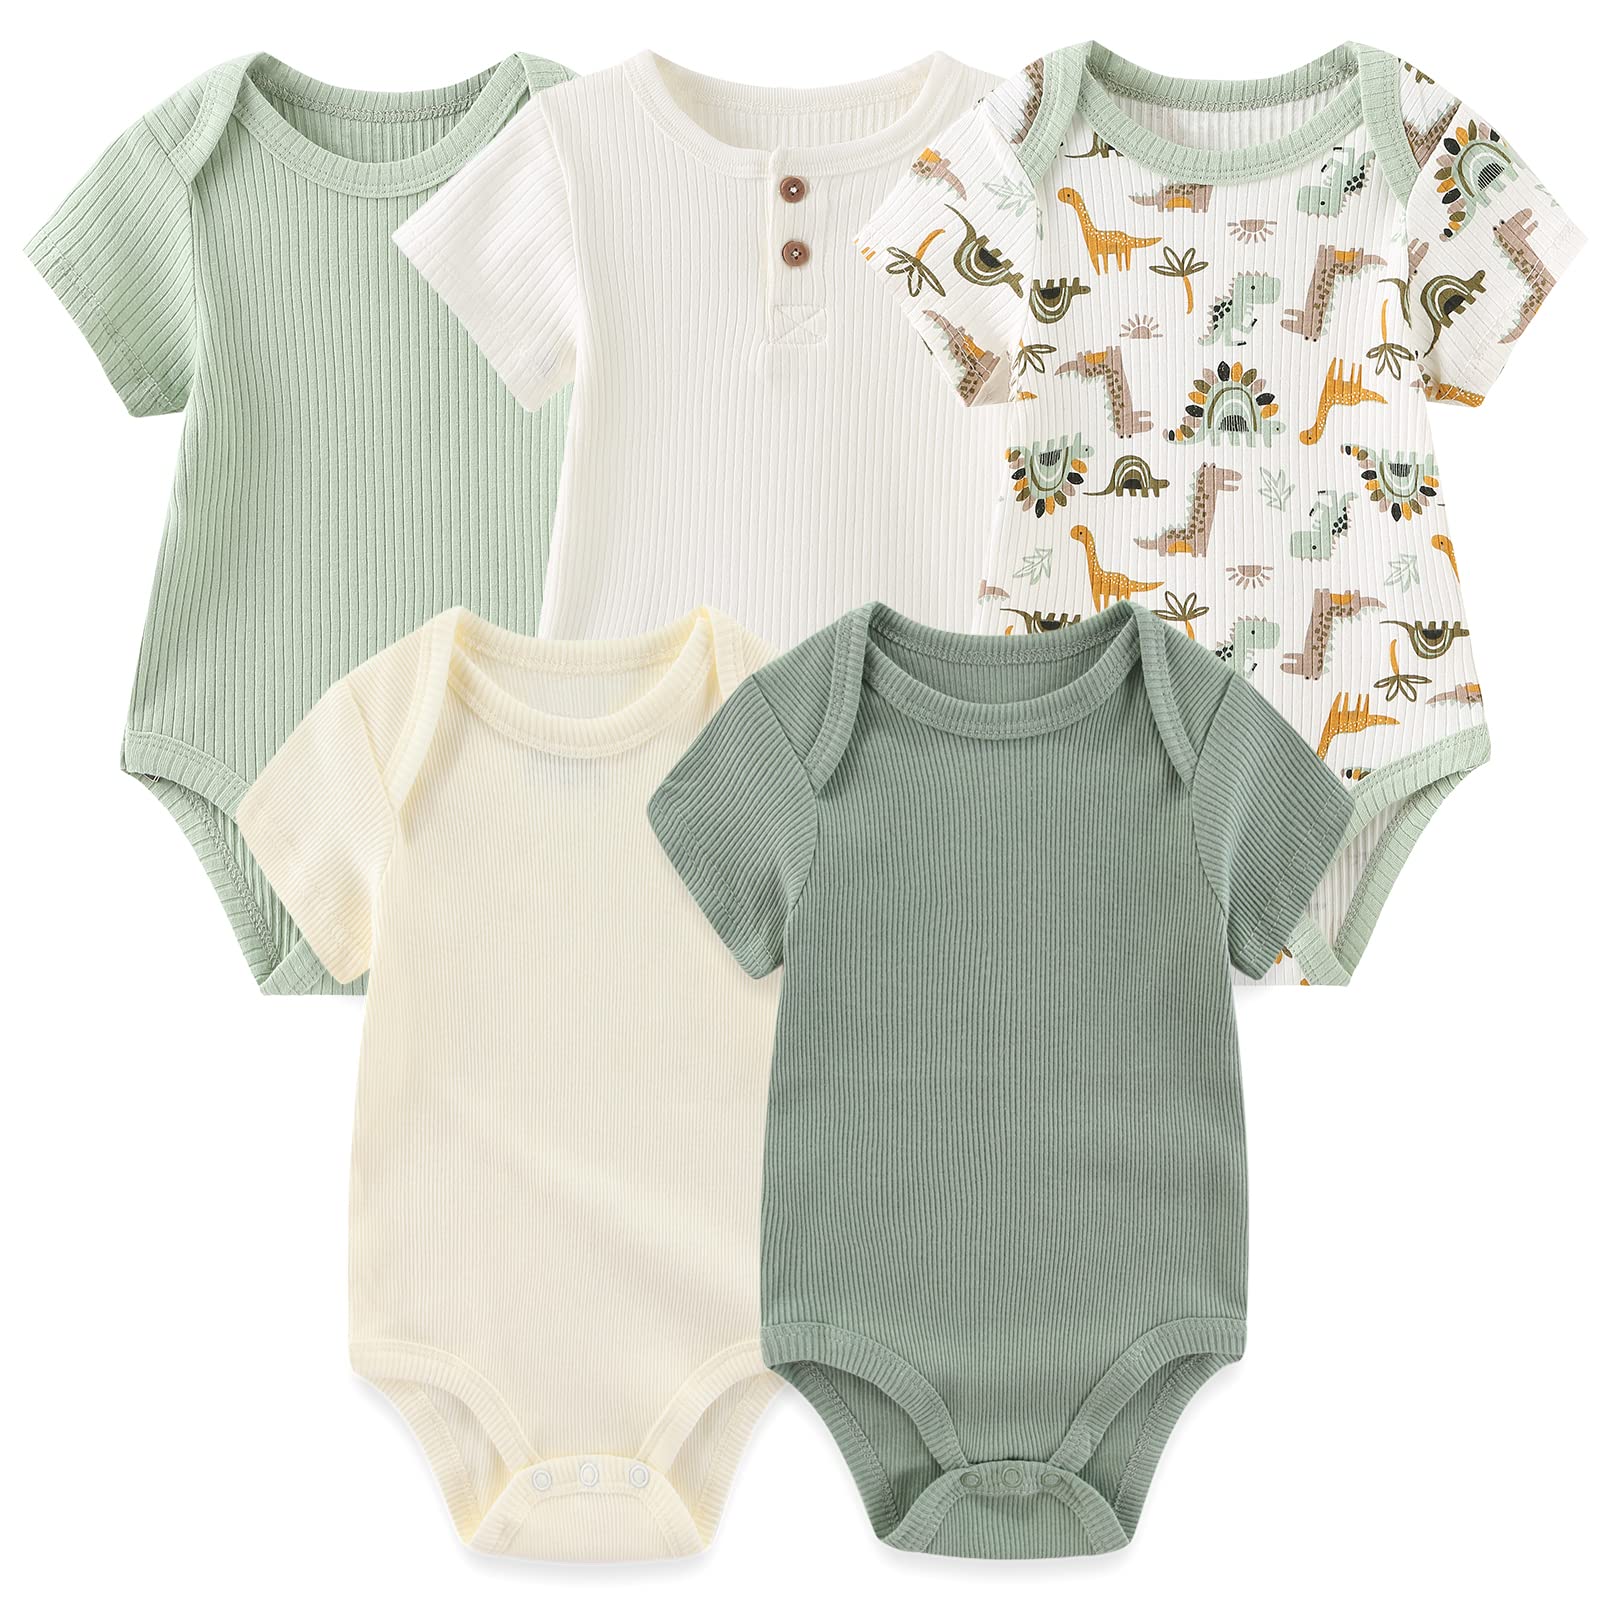 MAMIMAKA Newborn Baby Short Sleeve Bodysuit Cotton One-Piece Baby Clothes 5-Pack, 0-12 Months